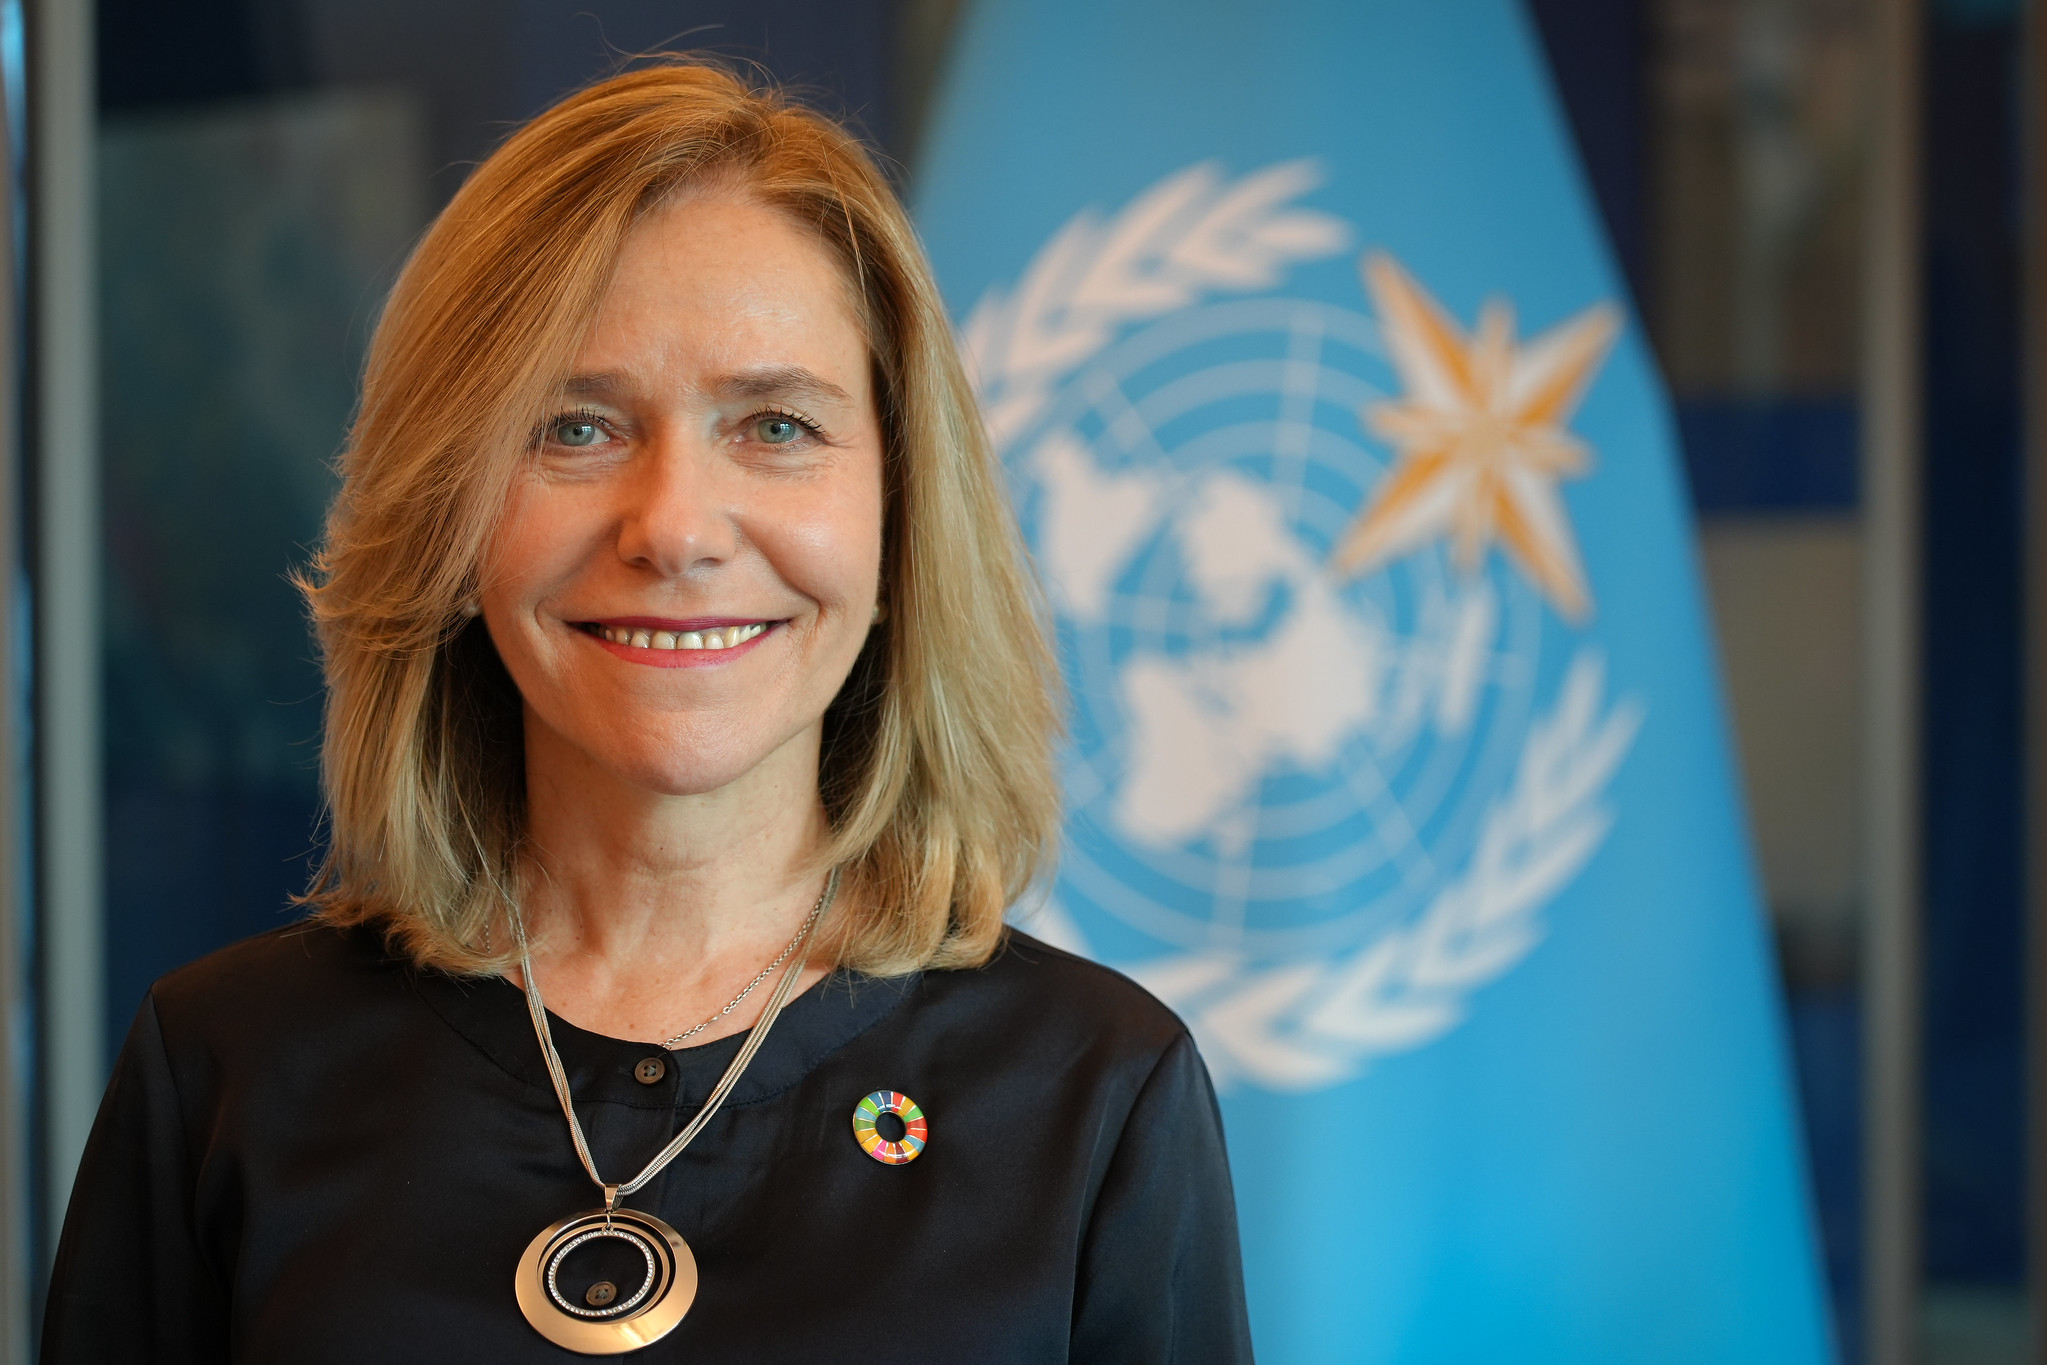 Prof. Celeste Saulo takes over the reign of Secretary General of WMO